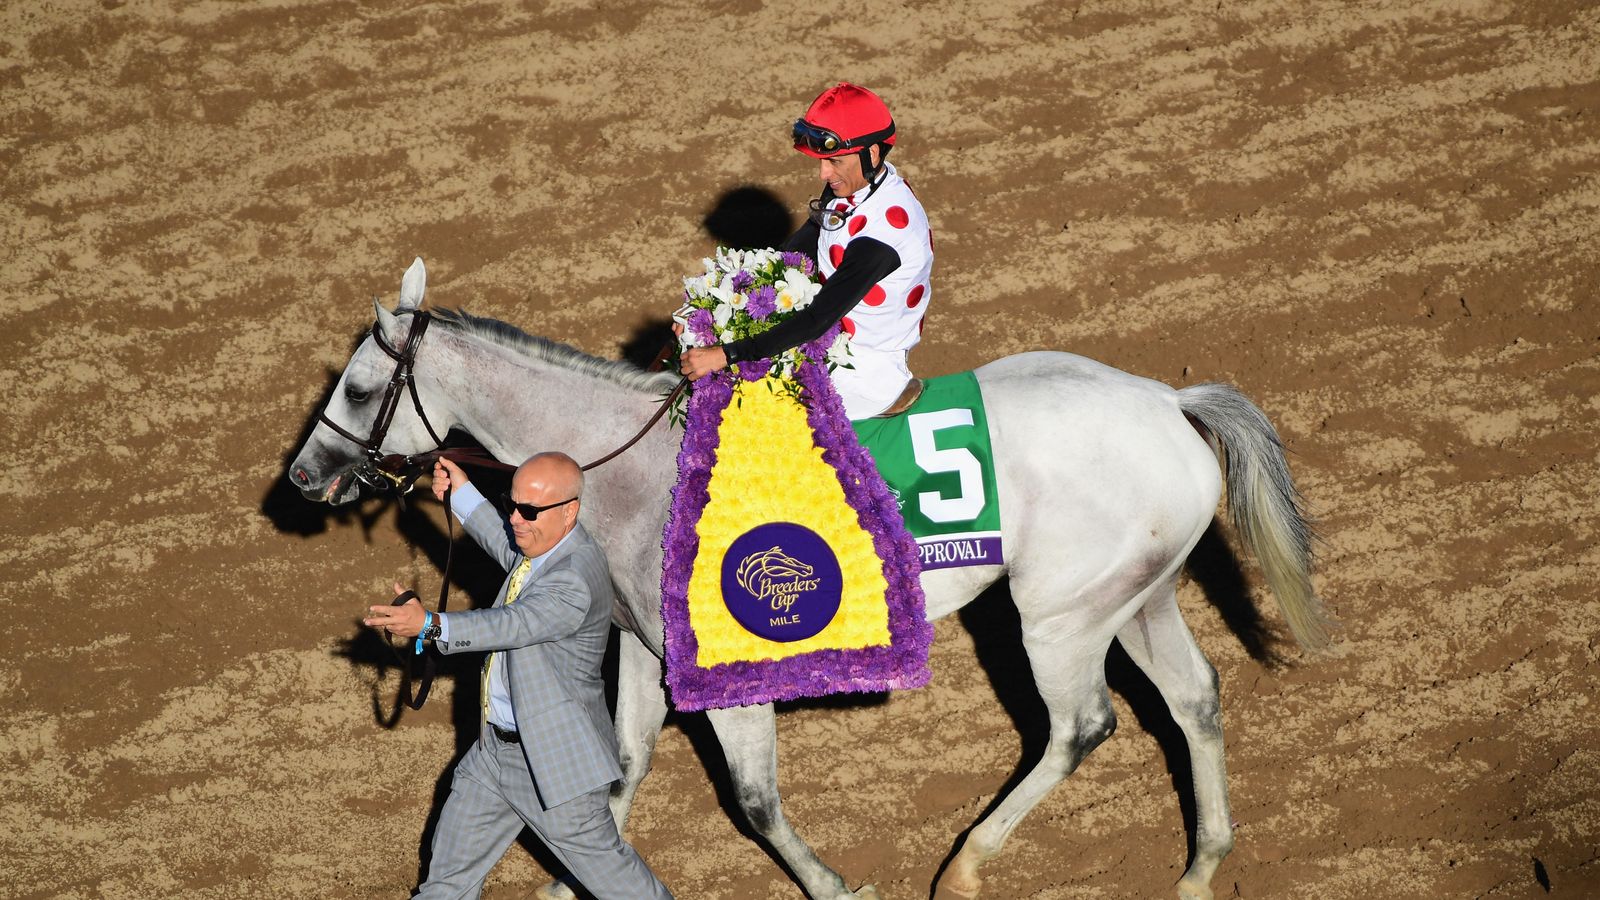 World Approval won the Breeders' Cup Mile at Del Mar. Racing News